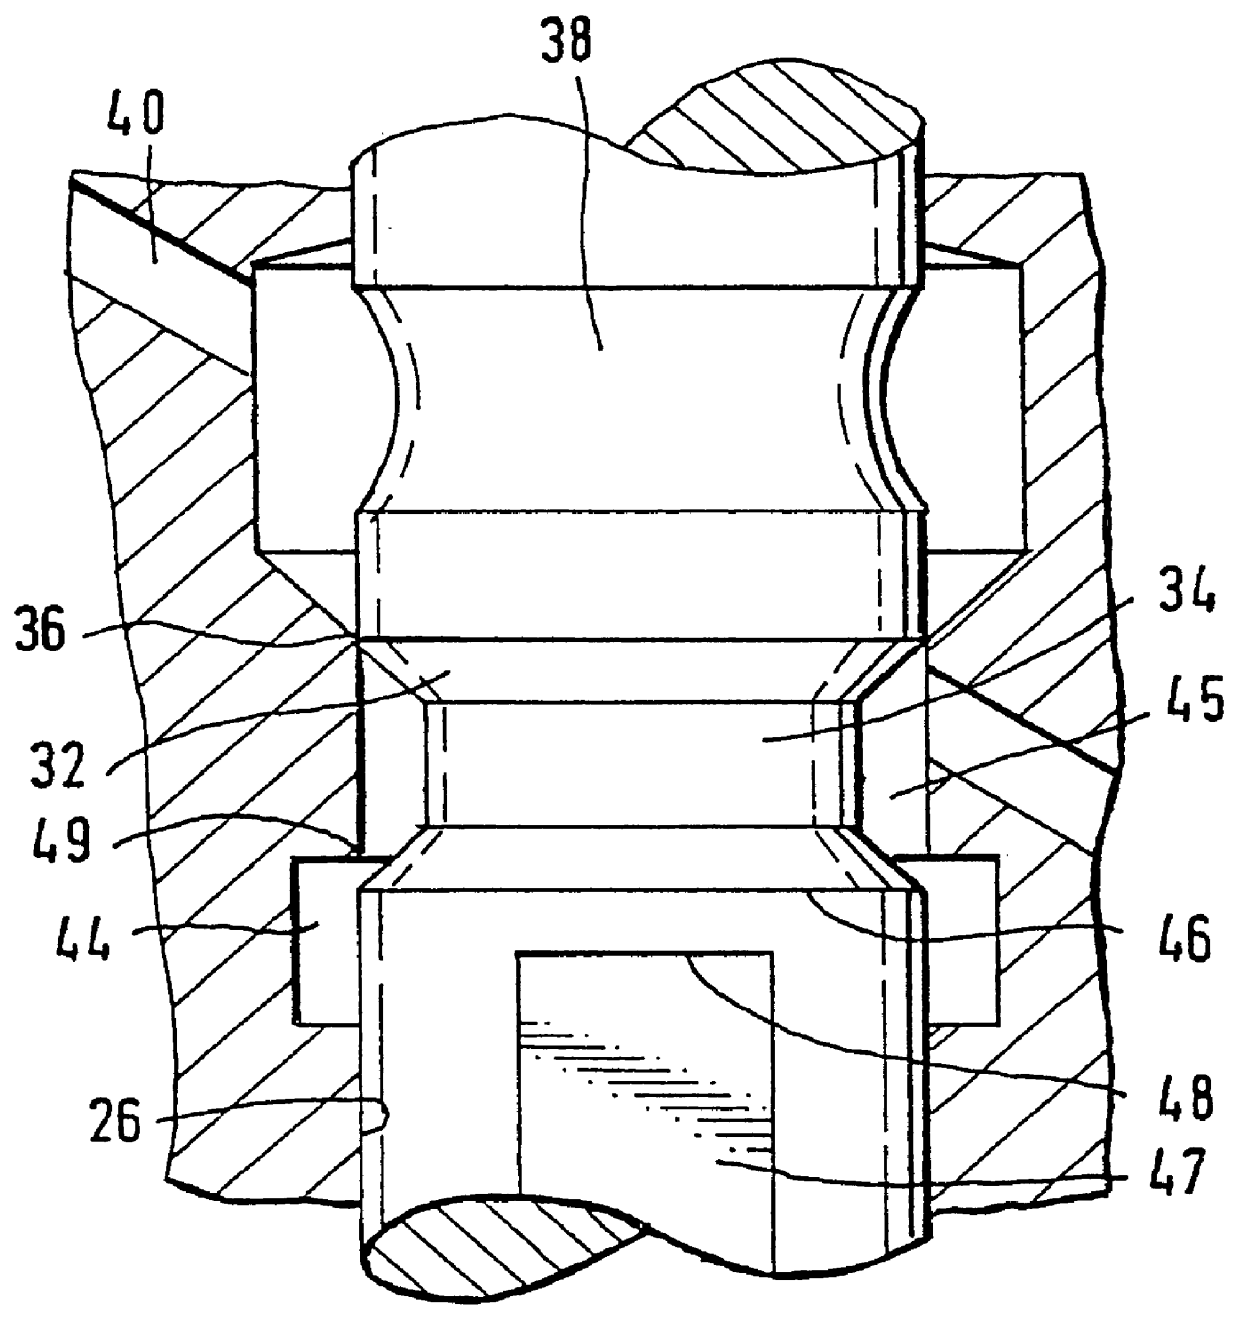 Fuel injection device for internal combustion engines